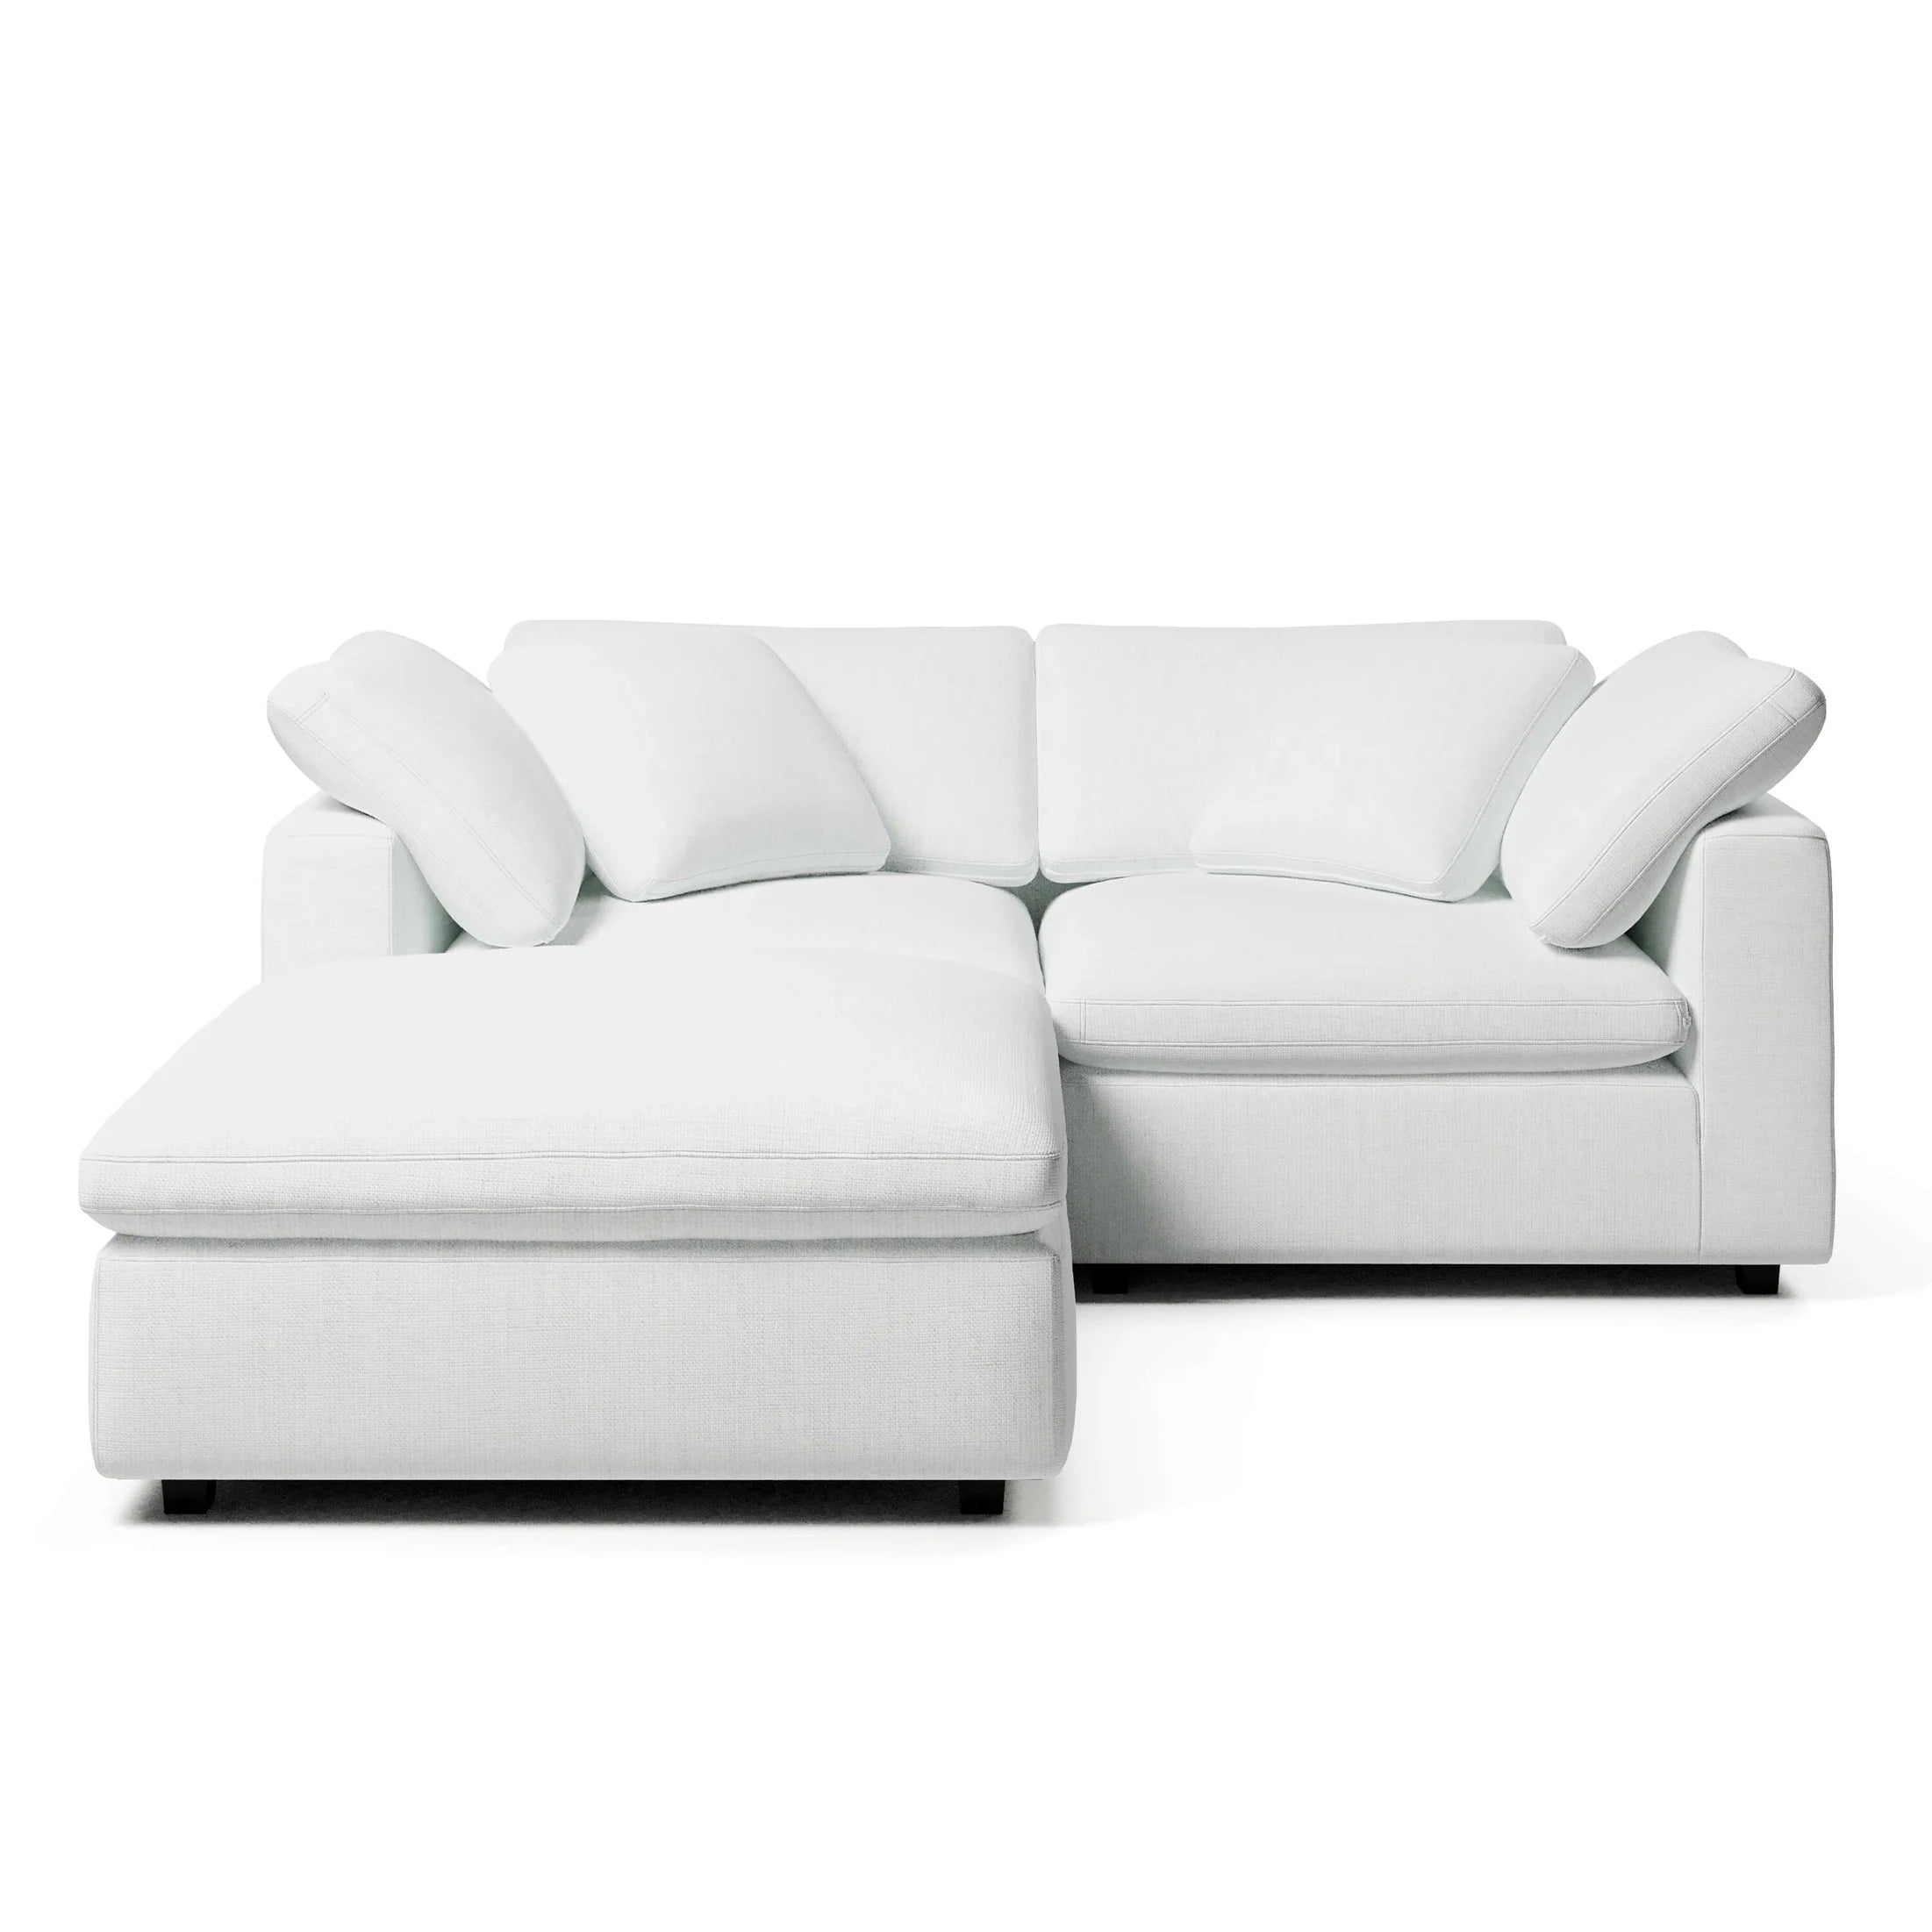 In Stock - Comfy Two Seater + Ottoman